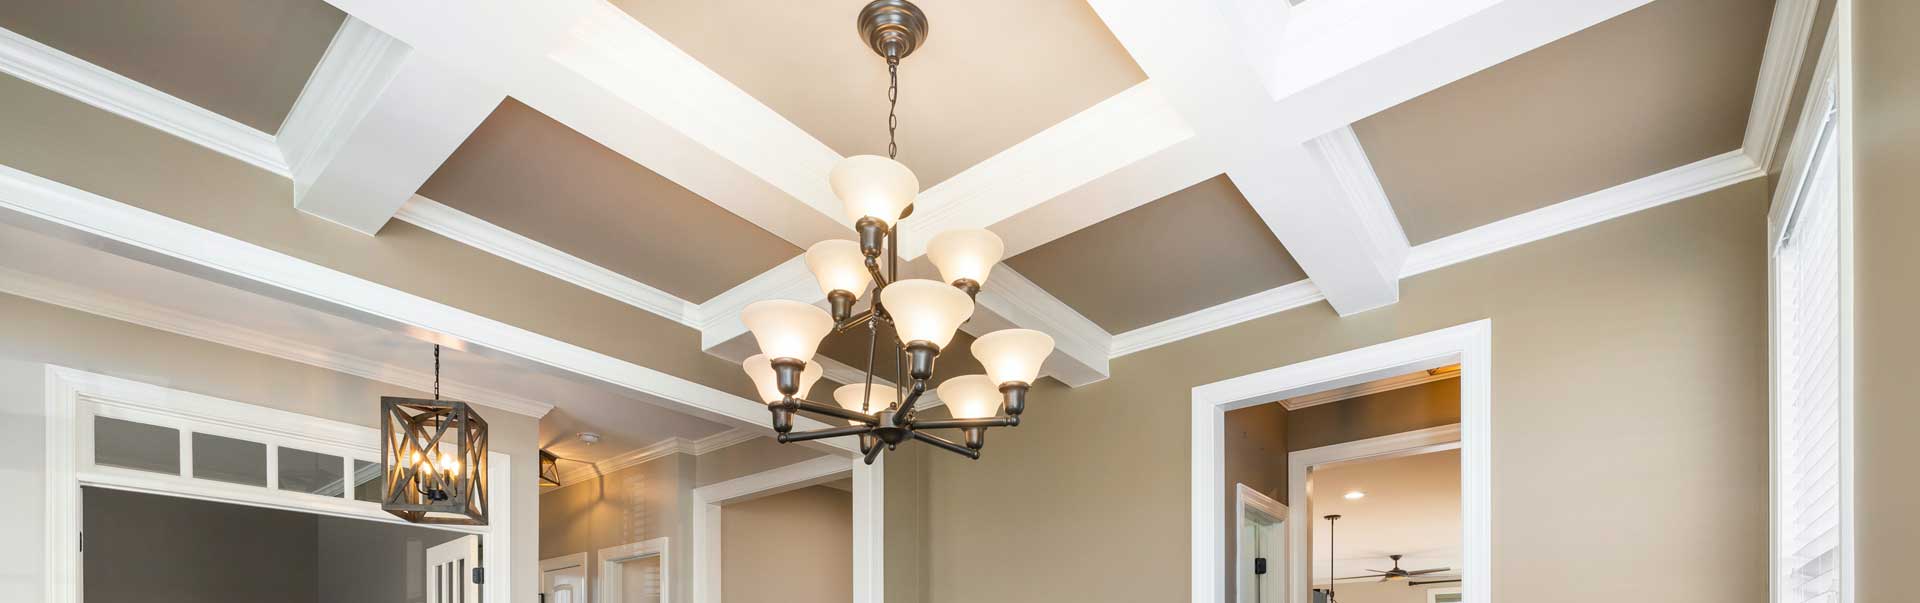 Coffered Ceiling Cost Material Labor